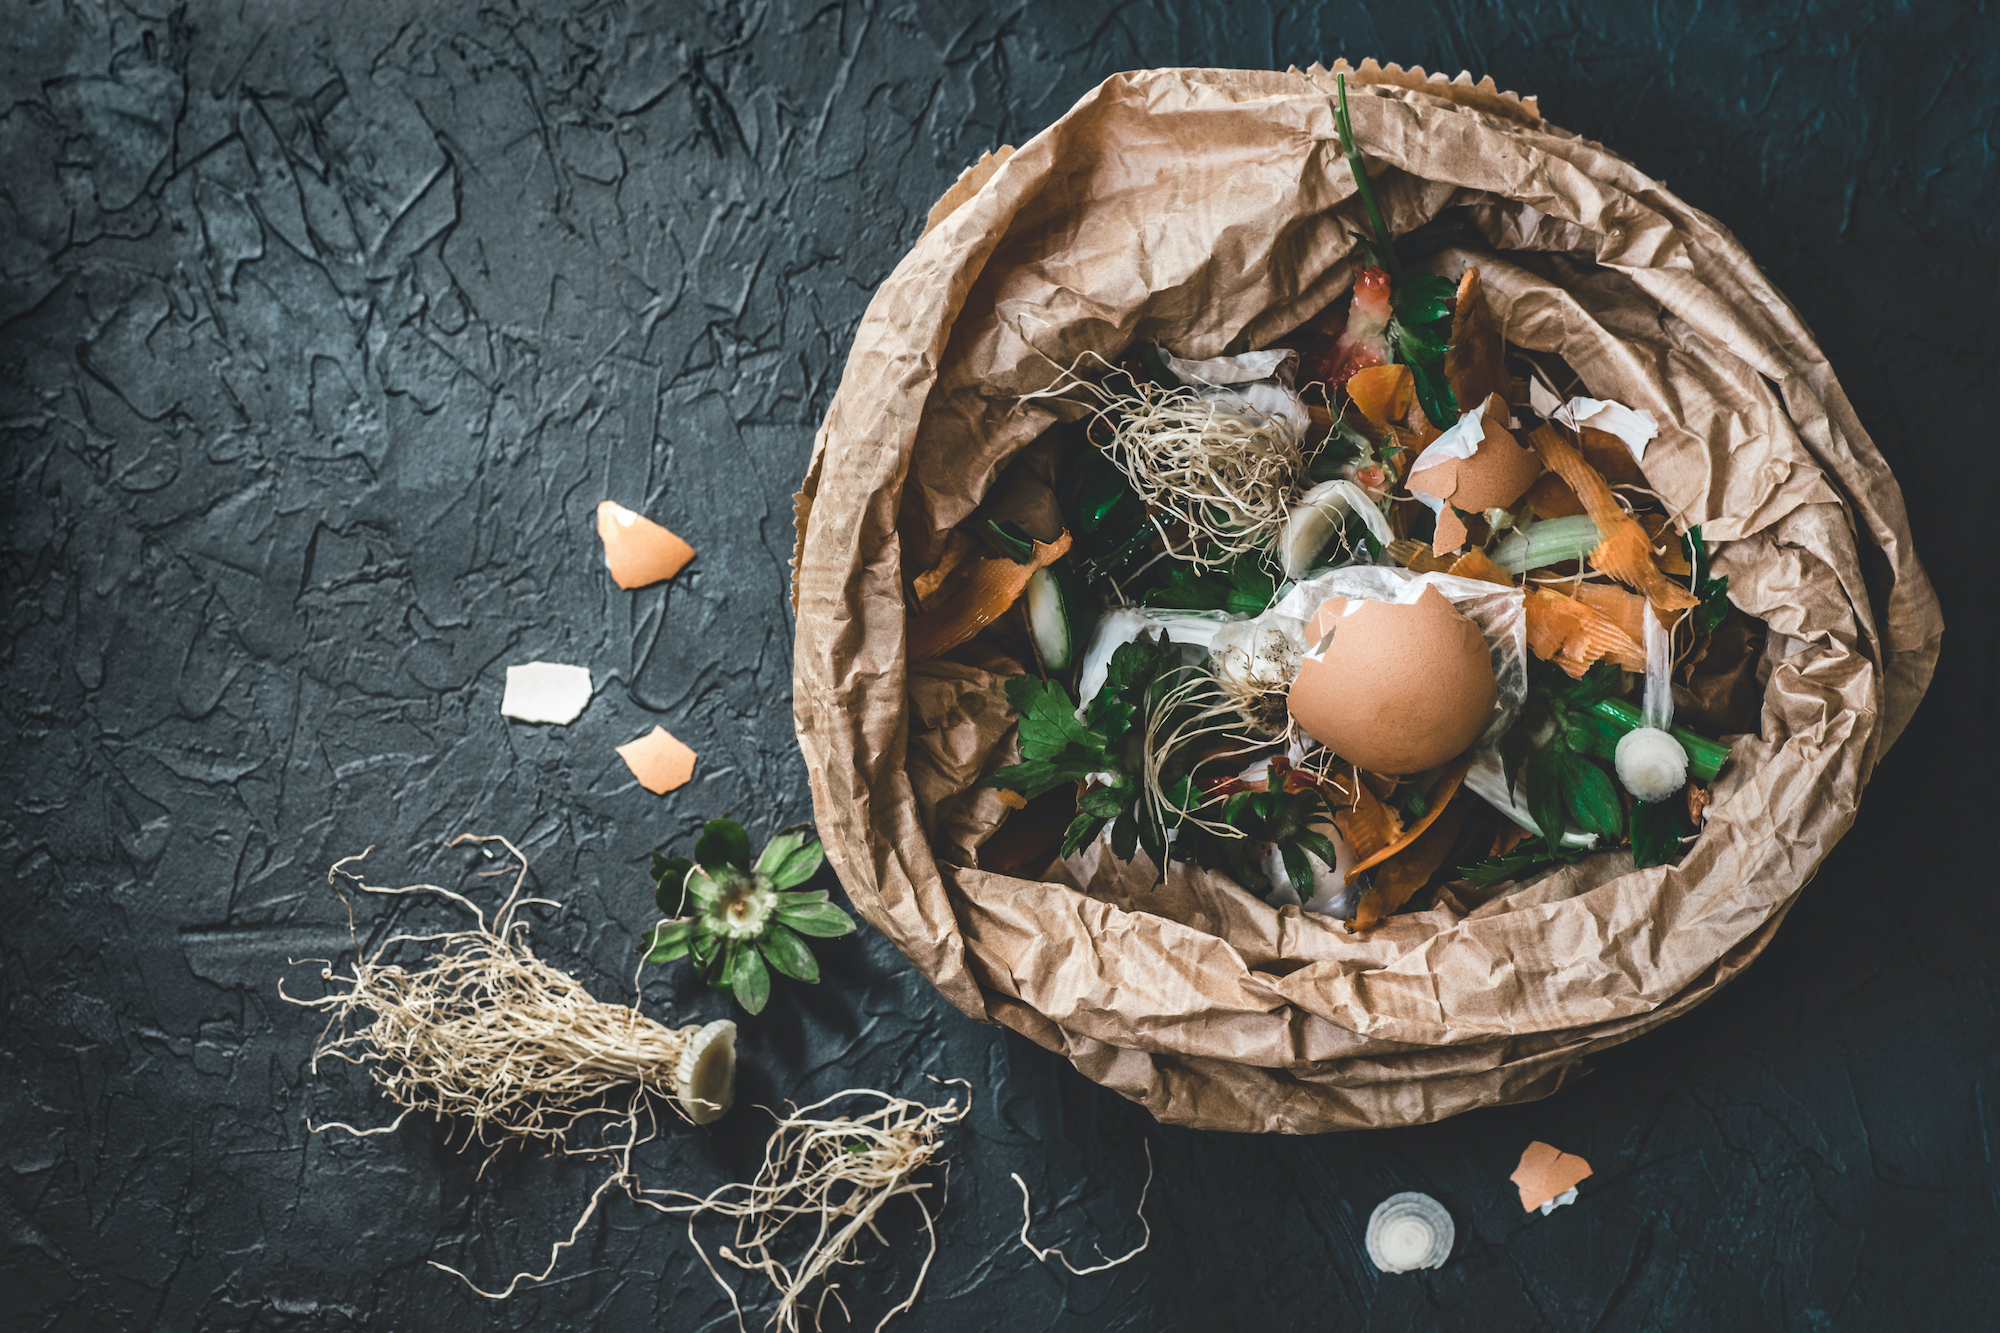 food waste and sustainability